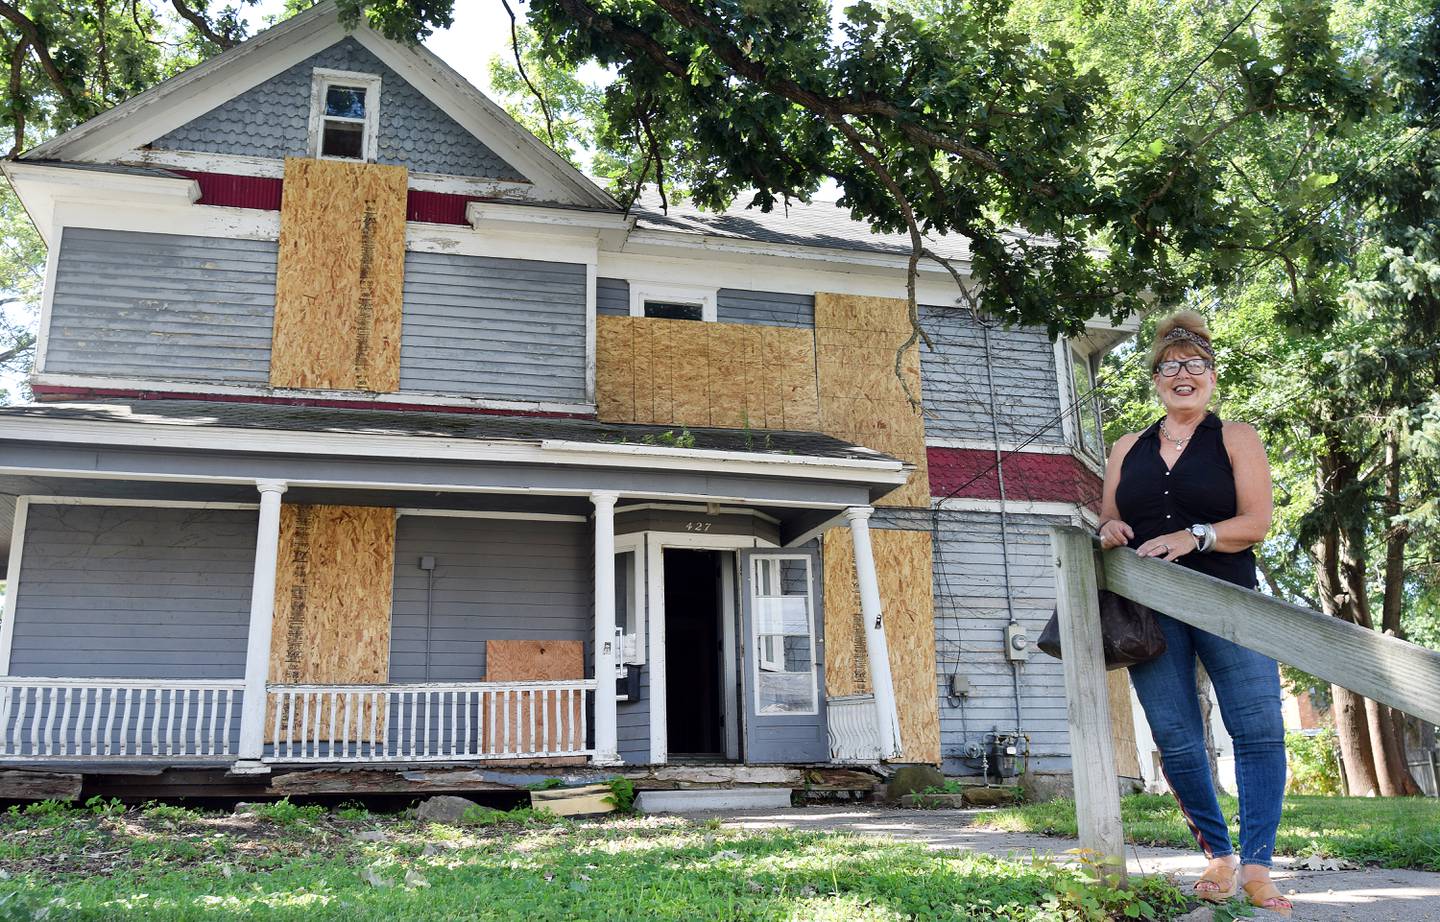 Nancy Sorbella of Carmel, N.Y., stands outside the 112-year-old property at 427 N. Third Ave. E. in Newton. Sorbella says she has become obsessed with the home, which belonged to her family at one point, and she wants to restore it back to life.